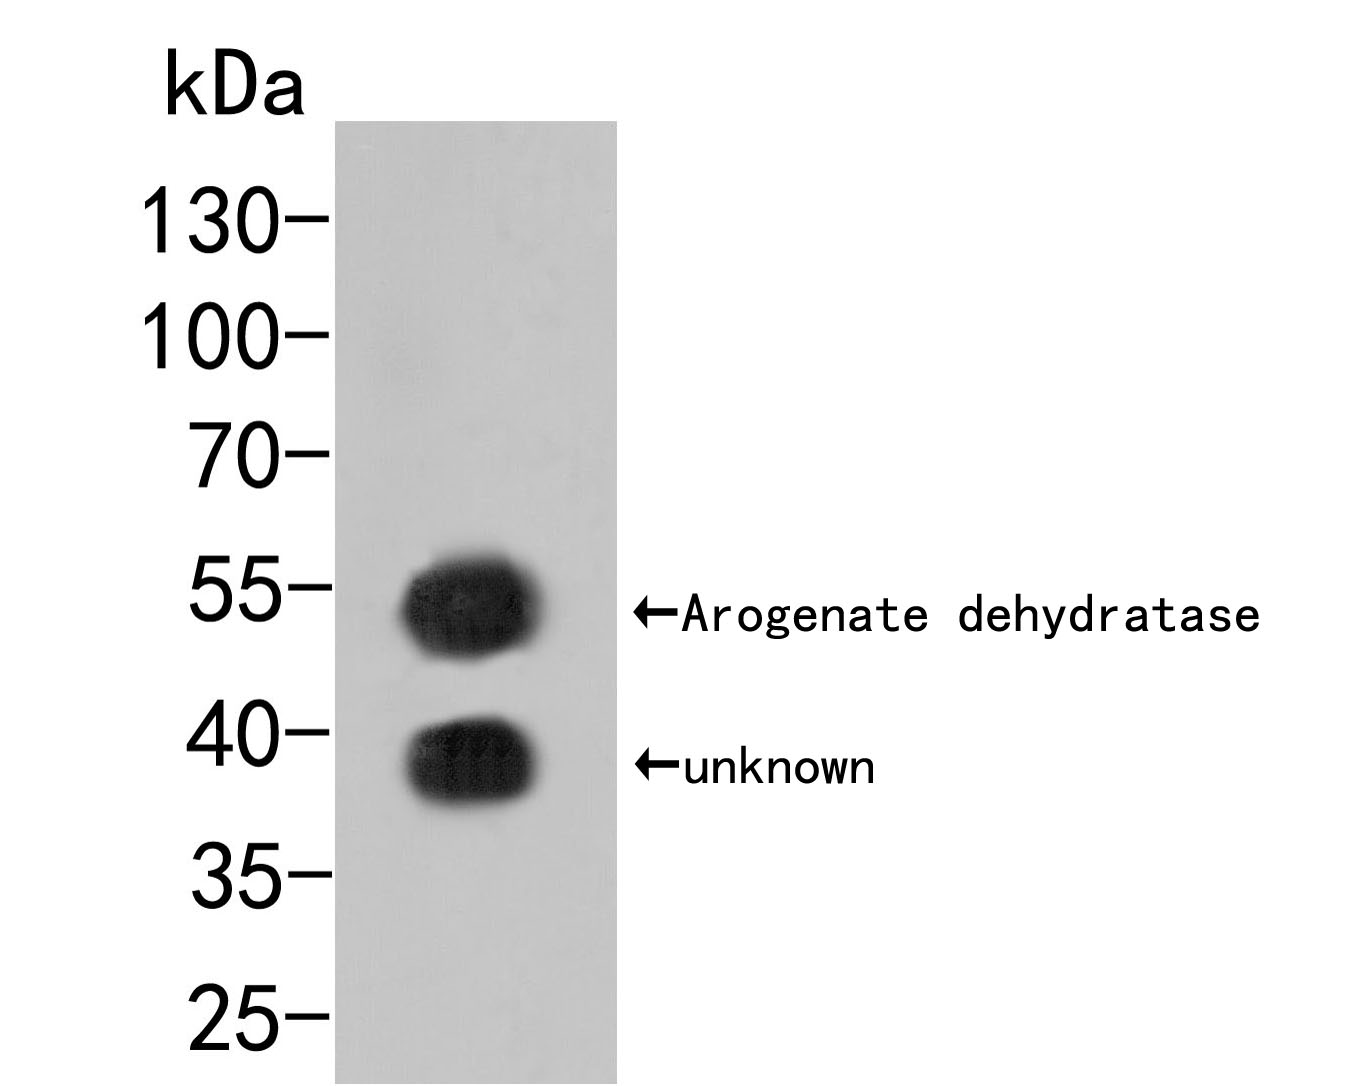 Western blot analysis of Arogenate dehydratase on Rice tissue lysates. Proteins were transferred to a PVDF membrane and blocked with 5% BSA in PBS for 1 hour at room temperature. The primary antibody (HA500108, 1/500) was used in 5% BSA at room temperature for 2 hours. Goat Anti-Rabbit IgG - HRP Secondary Antibody (HA1001) at 1:5,000 dilution was used for 1 hour at room temperature.